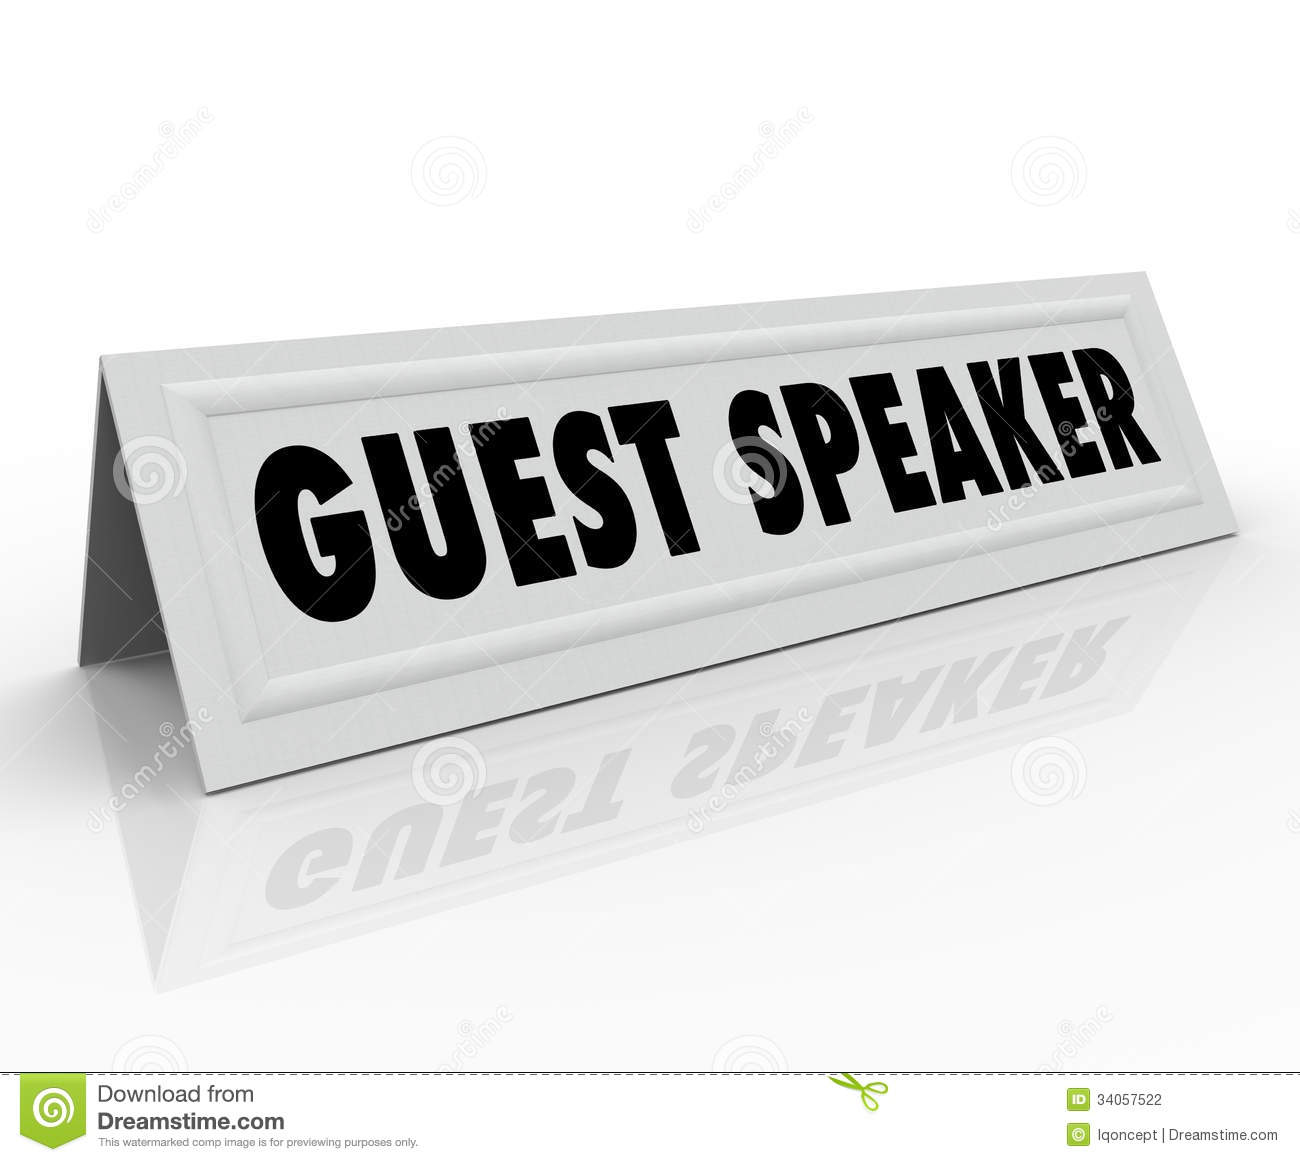 The Words Guest Speaker On A Paper Folded Tent Card To Illustrate The